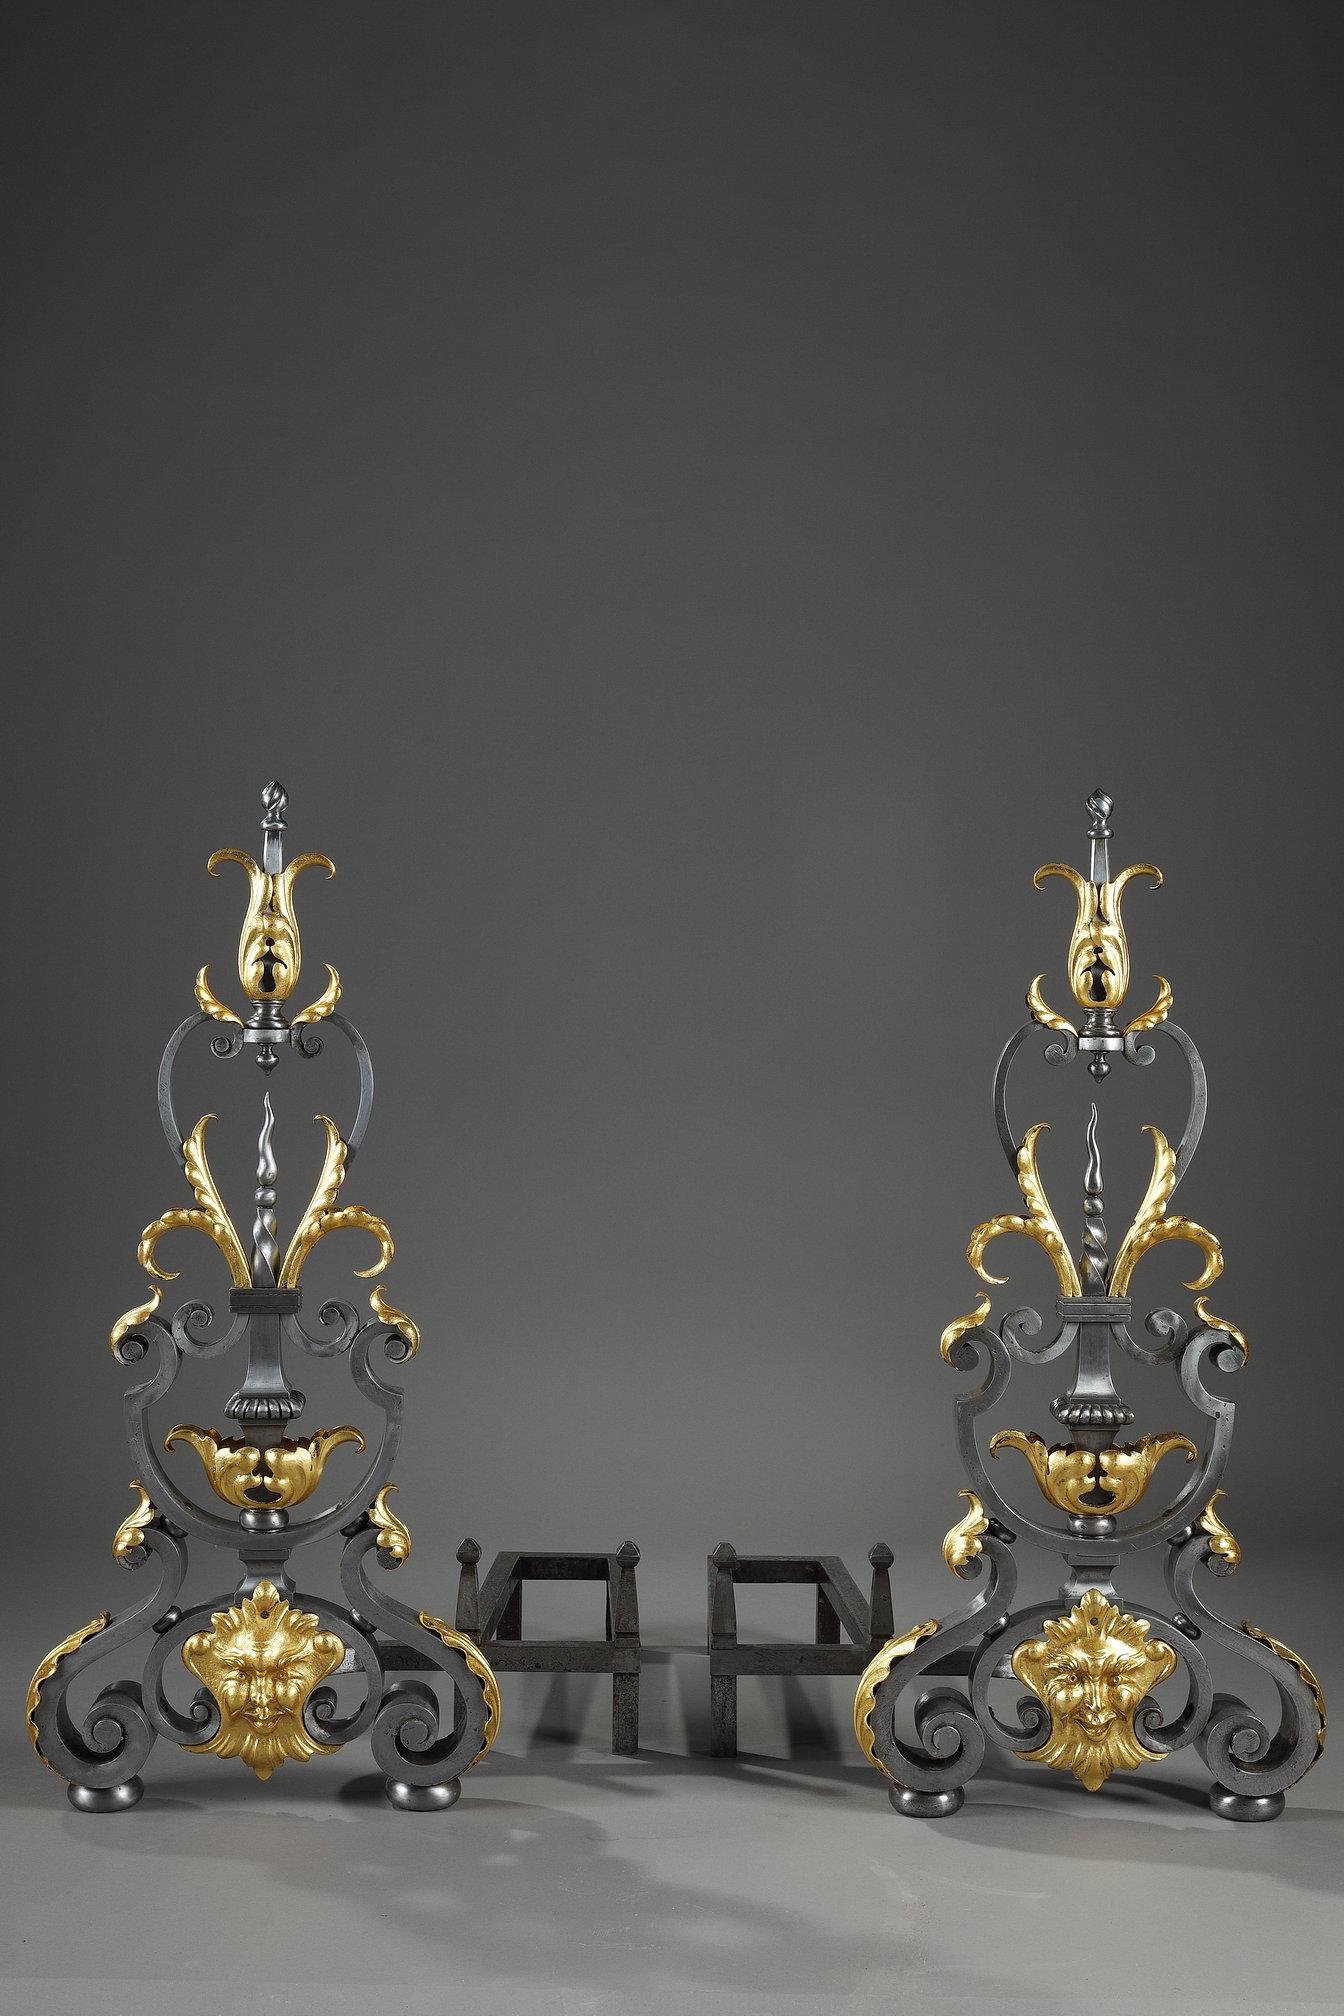 A large and beautiful pair of wrought-iron landiers or mantel fronts decorated with scrolls and foliage enhanced with gold, with a mask at the bottom. The contrasting colors underline the decorative character. The andirons come with their iron to